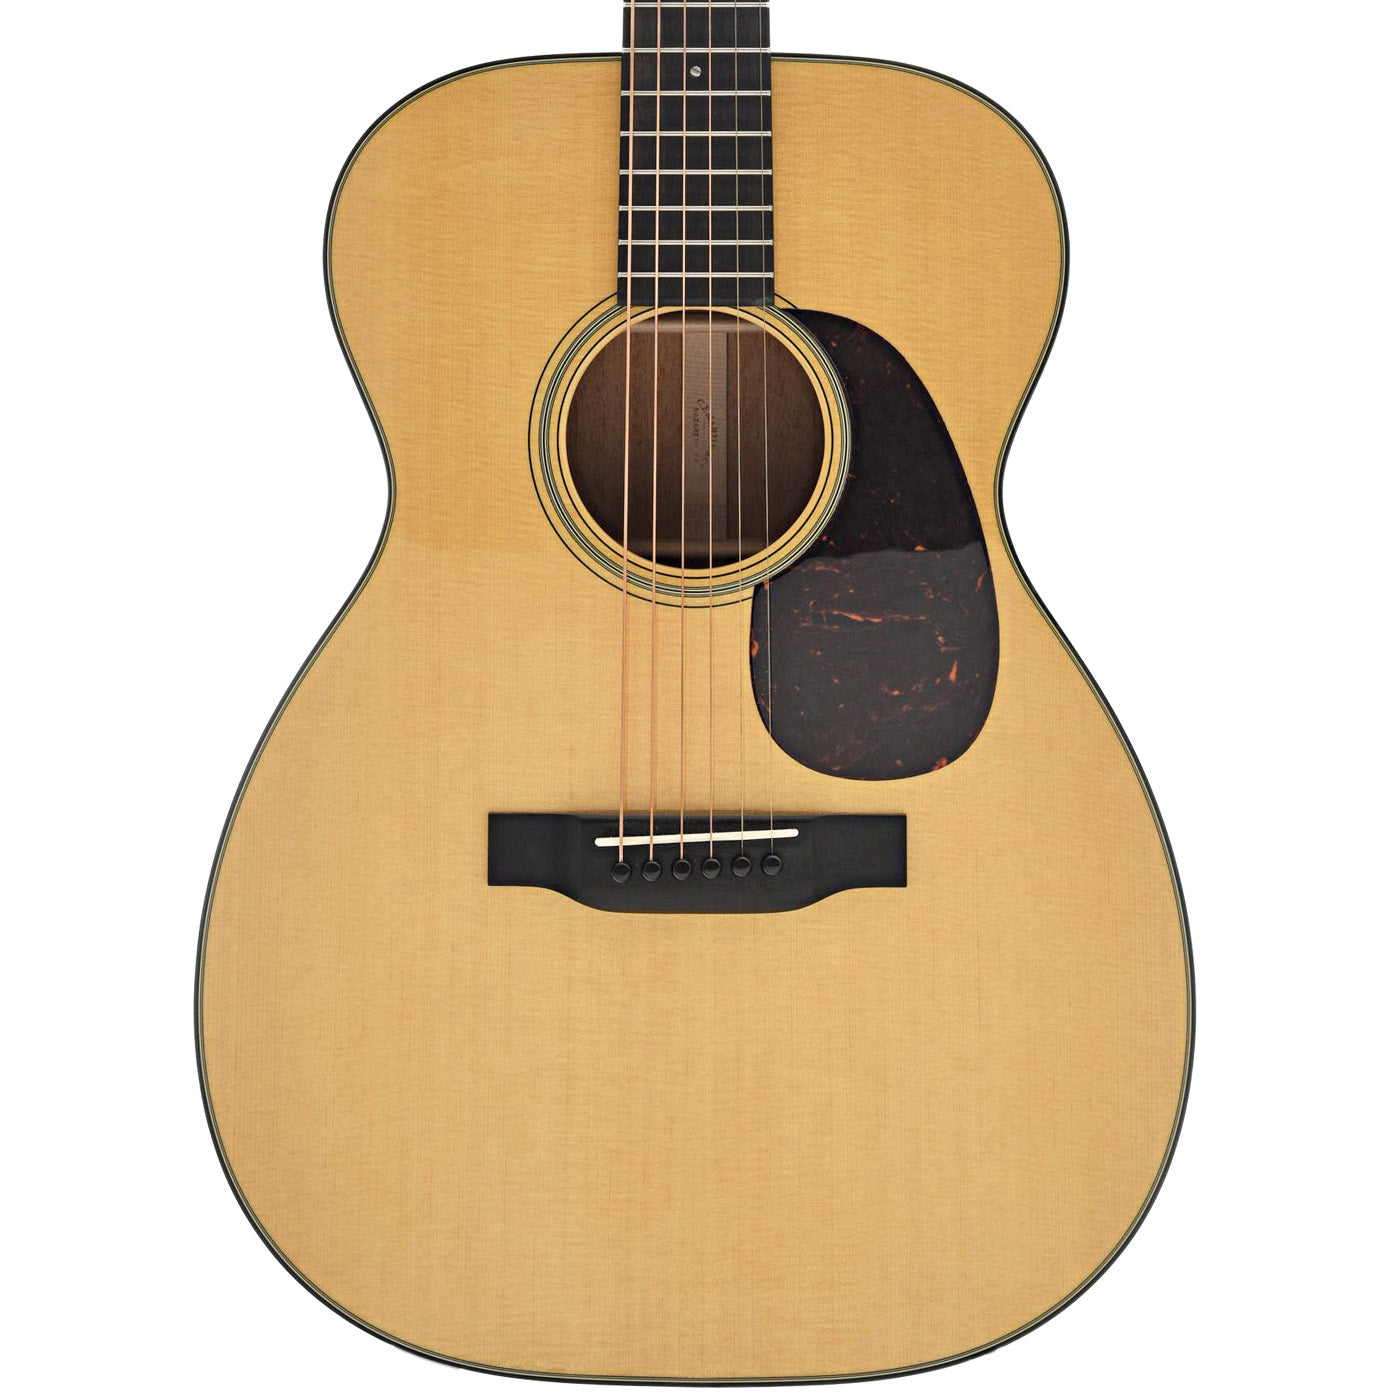 place holder of  Martin 00-18 Guitar